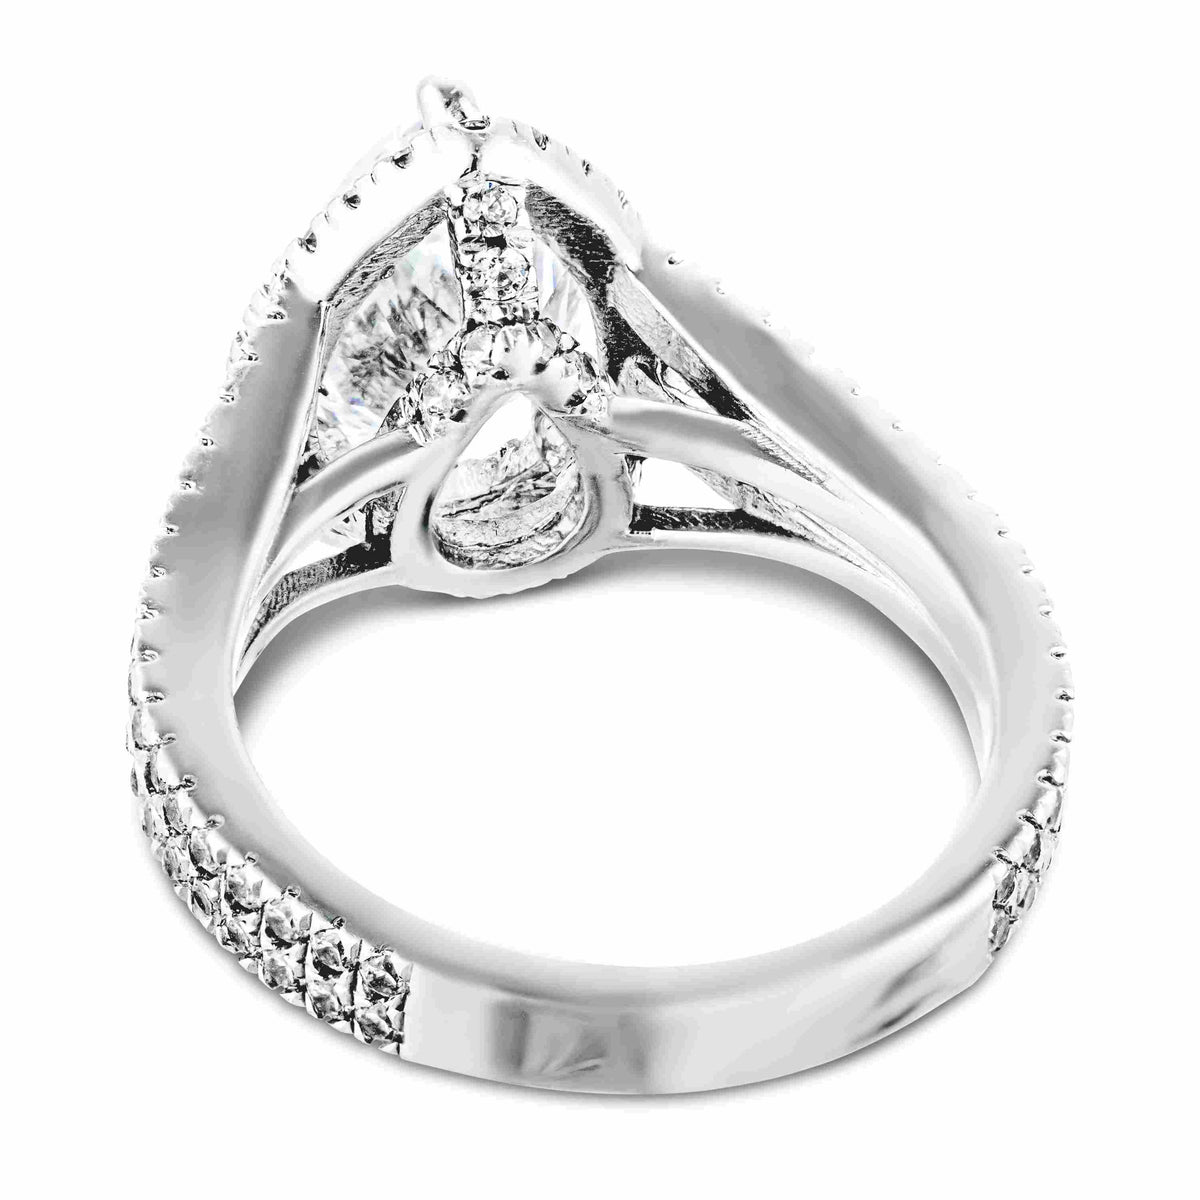 Shown with 2ct Pear Cut Lab Grown Diamond in 14k White Gold